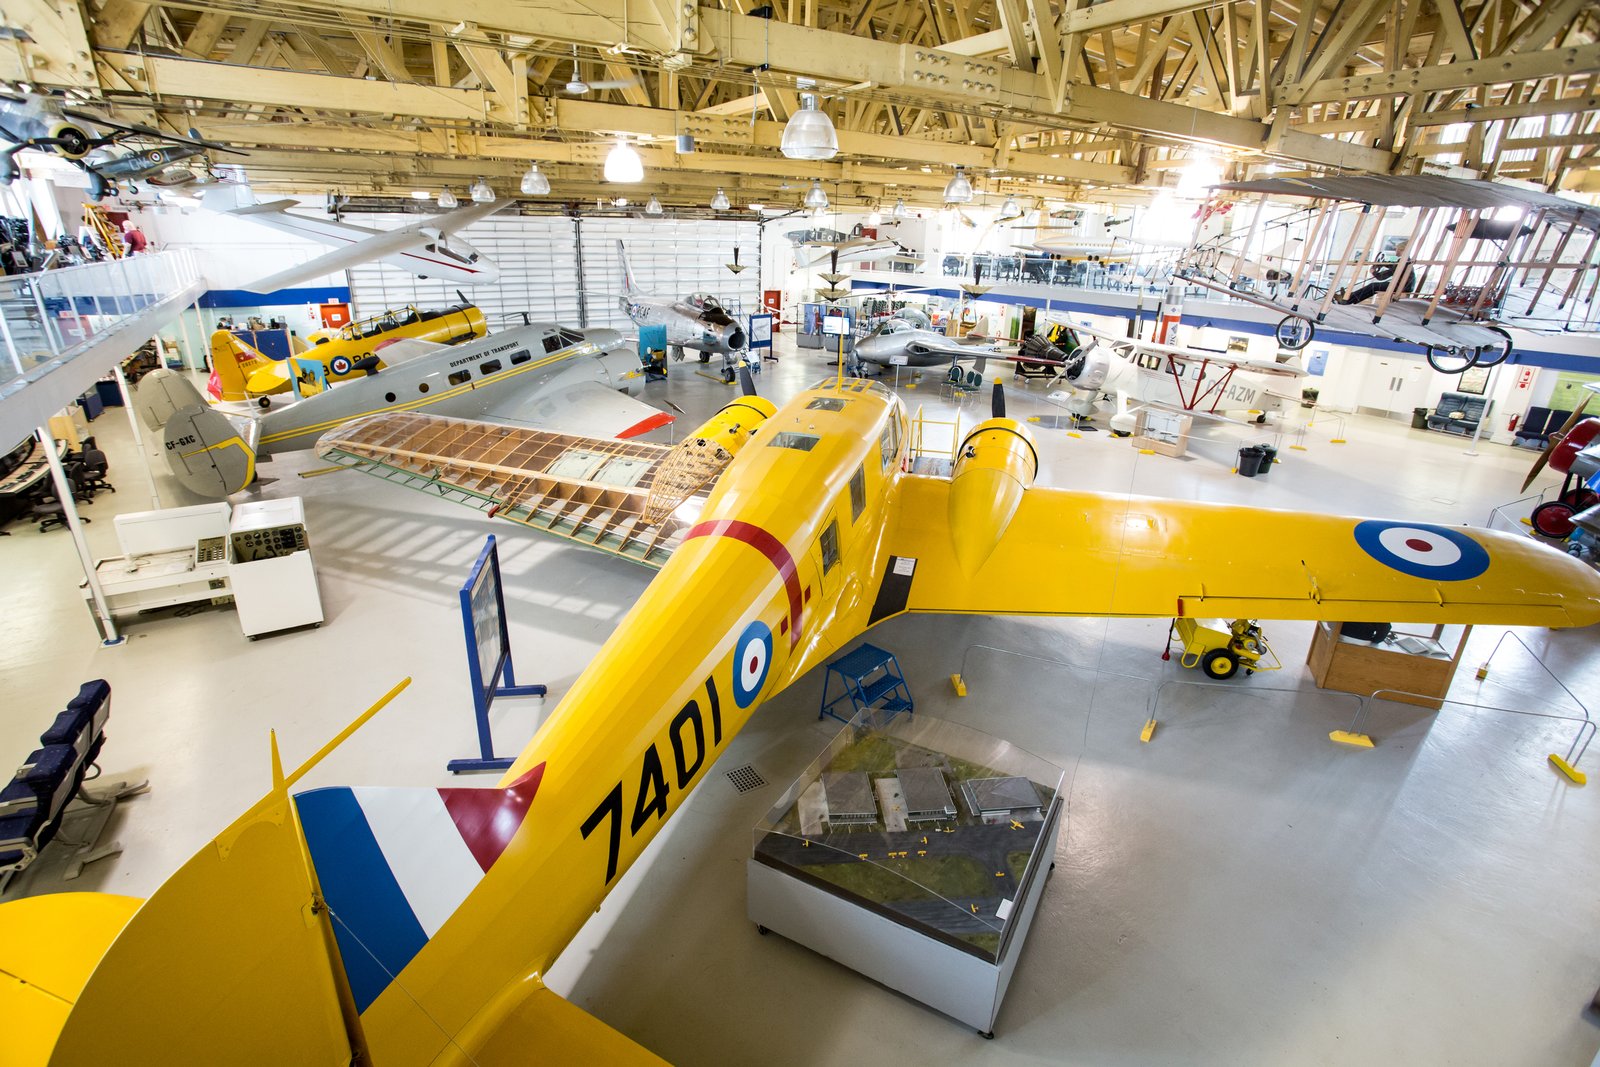 View from above an aircraft on display in a hanger at a Aero Space Museum.